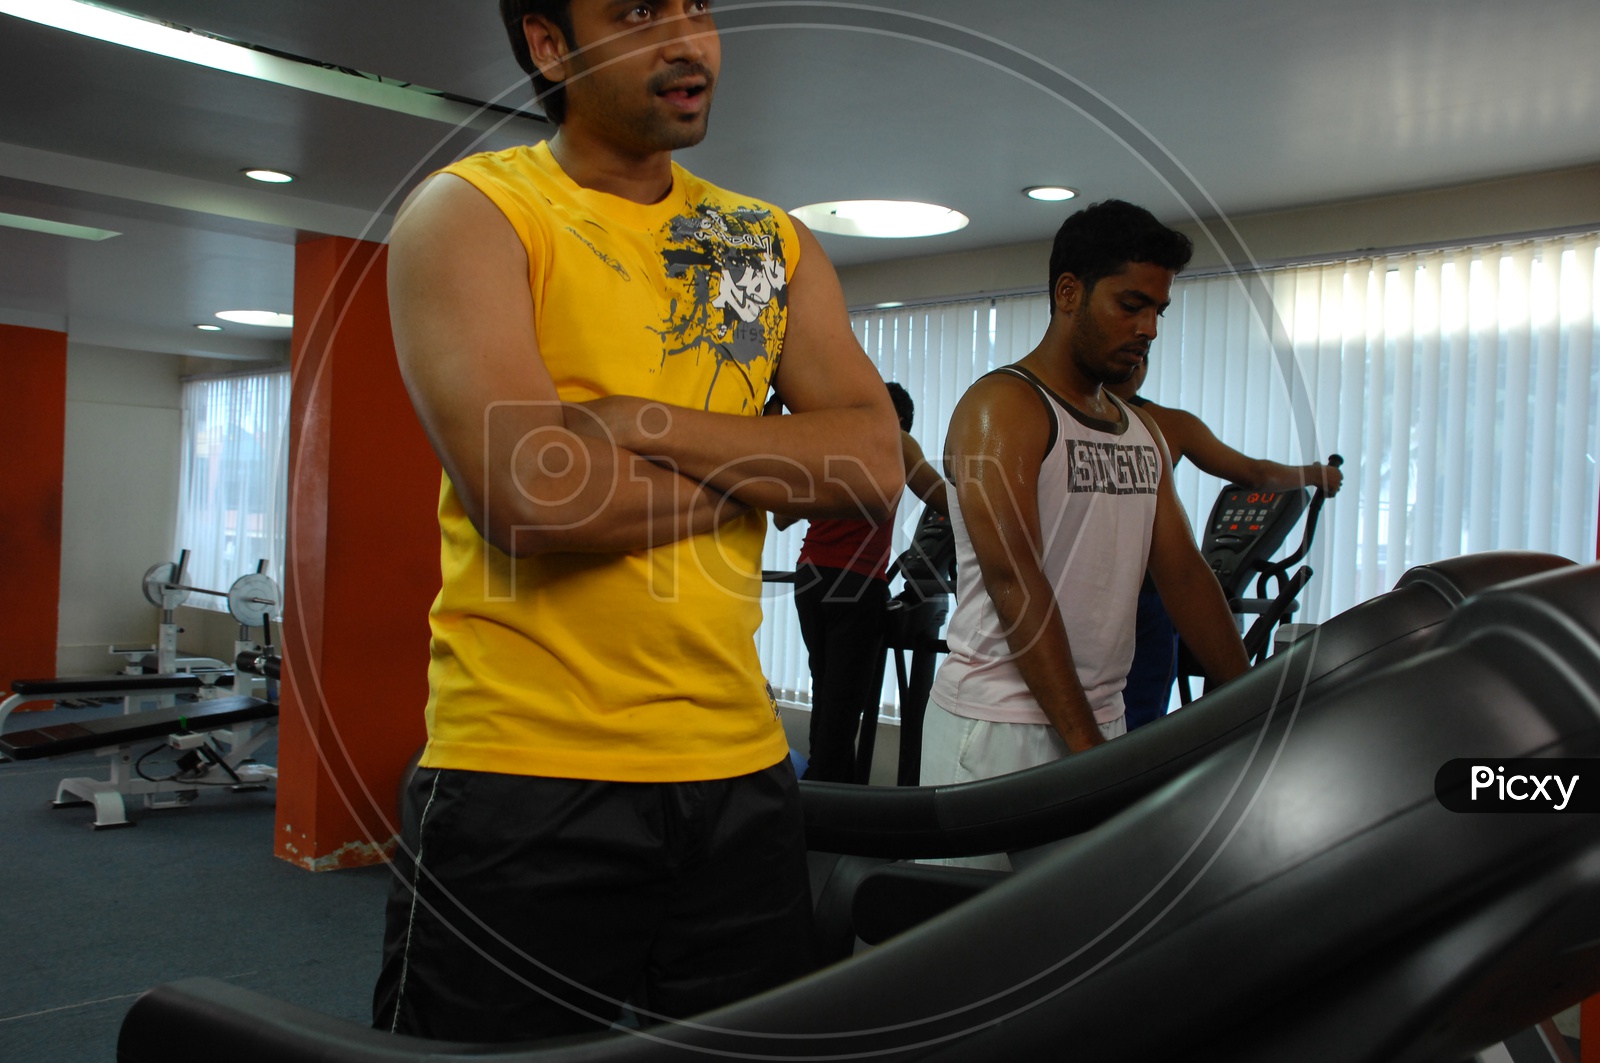 Actor Sumanth holding his hands with his mouth open alongside the treadmill in a Gym